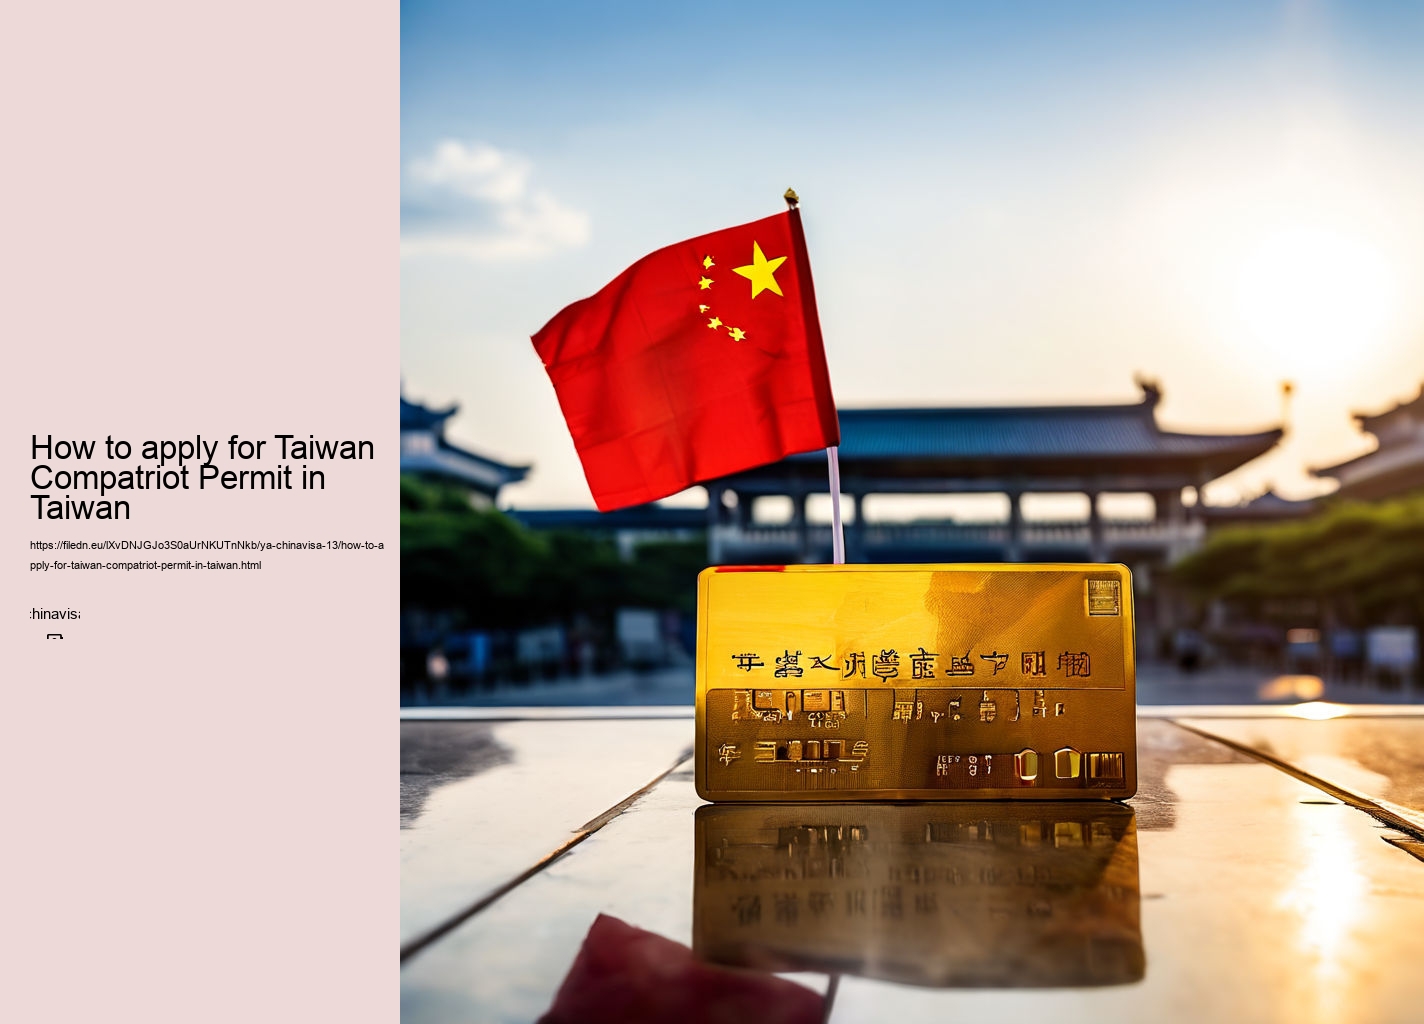 How to apply for Taiwan Compatriot Permit in Taiwan